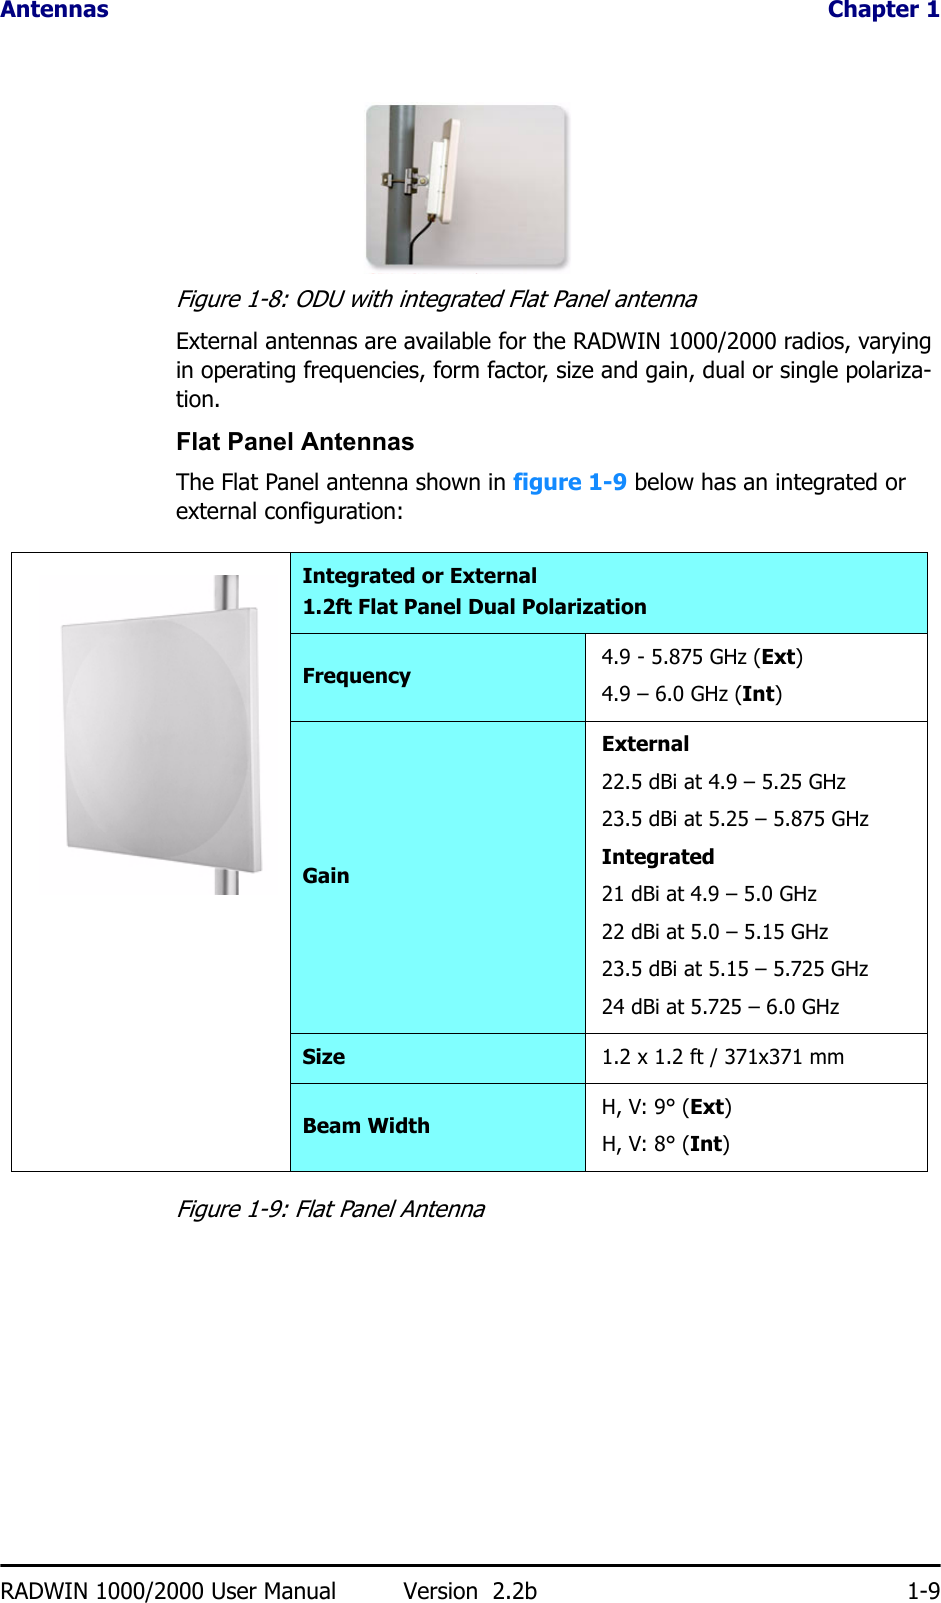 Antennas  Chapter 1RADWIN 1000/2000 User Manual Version  2.2b 1-9Figure 1-8: ODU with integrated Flat Panel antennaExternal antennas are available for the RADWIN 1000/2000 radios, varying in operating frequencies, form factor, size and gain, dual or single polariza-tion.Flat Panel AntennasThe Flat Panel antenna shown in figure 1-9 below has an integrated or external configuration:Figure 1-9: Flat Panel AntennaIntegrated or External1.2ft Flat Panel Dual PolarizationFrequency 4.9 - 5.875 GHz (Ext)4.9 – 6.0 GHz (Int)GainExternal22.5 dBi at 4.9 – 5.25 GHz 23.5 dBi at 5.25 – 5.875 GHz Integrated21 dBi at 4.9 – 5.0 GHz 22 dBi at 5.0 – 5.15 GHz 23.5 dBi at 5.15 – 5.725 GHz24 dBi at 5.725 – 6.0 GHzSize 1.2 x 1.2 ft / 371x371 mmBeam Width H, V: 9° (Ext)H, V: 8° (Int)